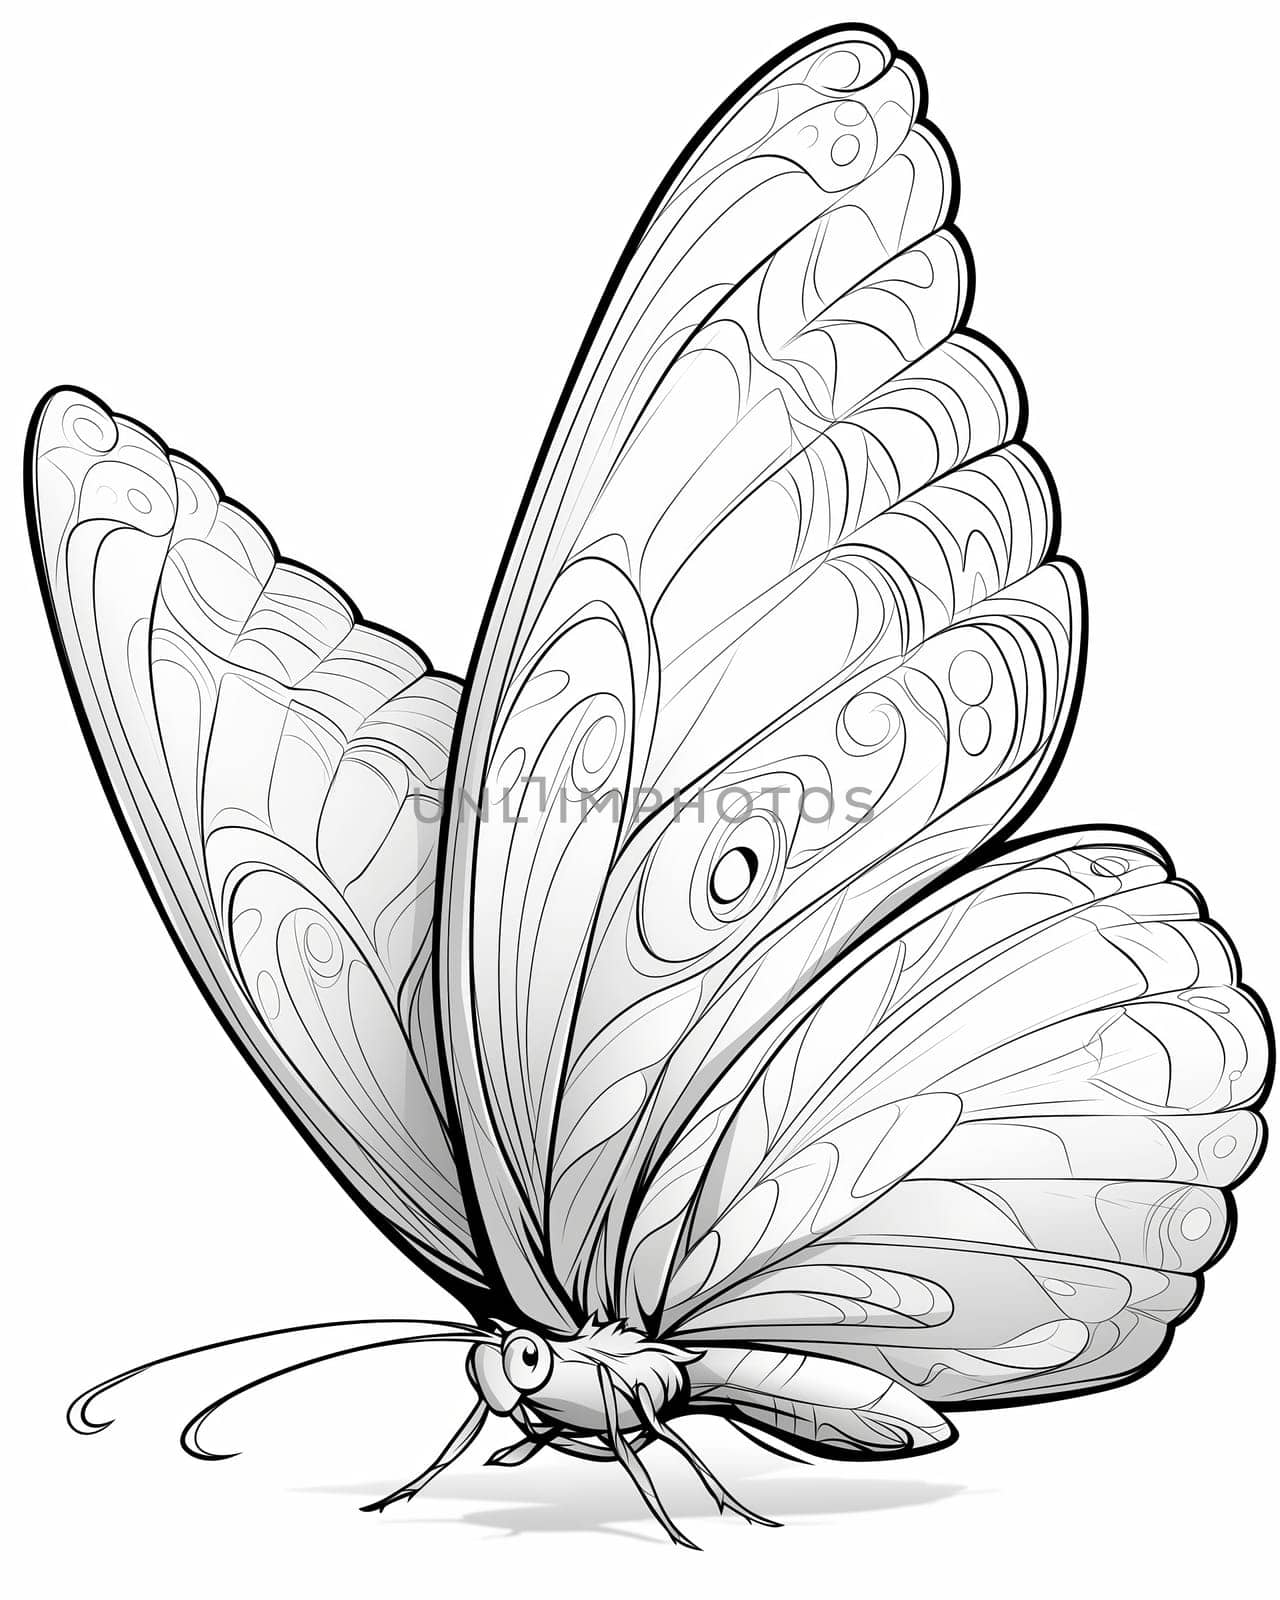 Coloring book for children, butterfly coloring. Selective soft focus.